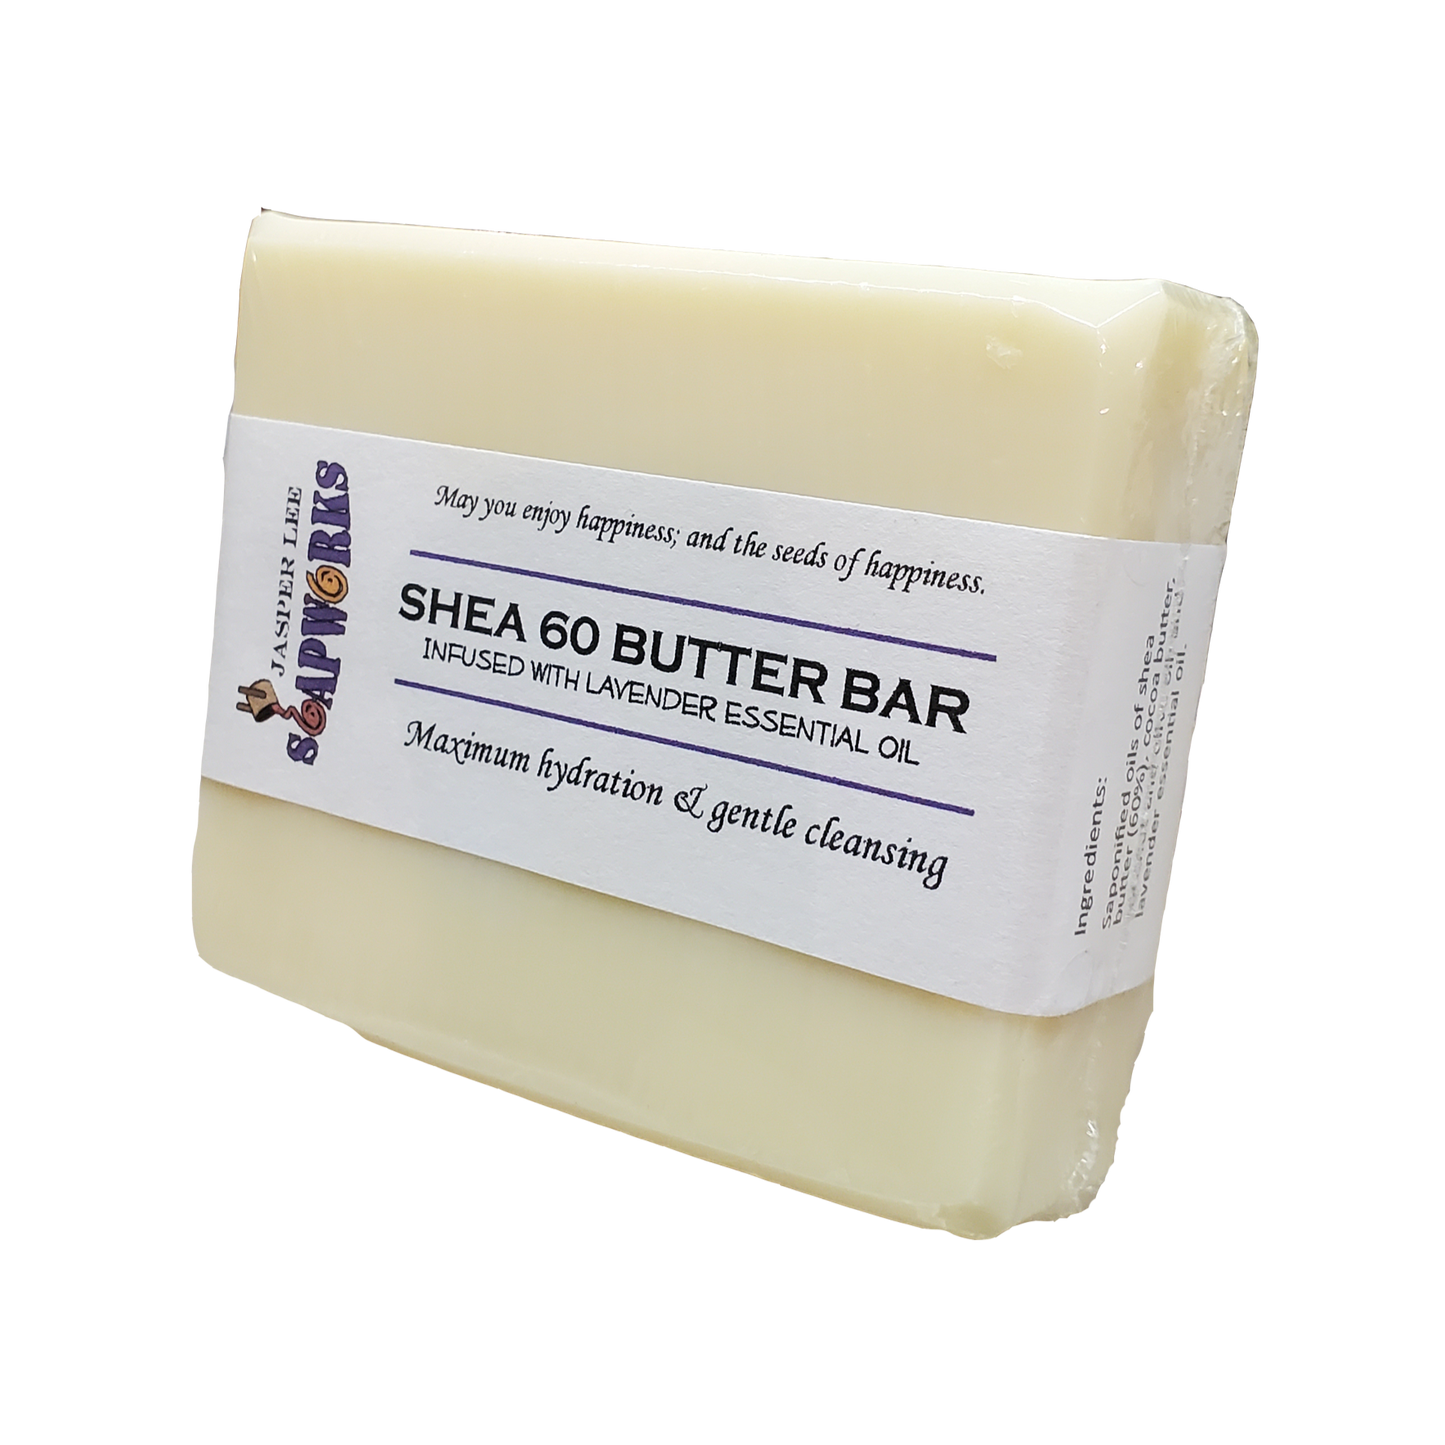 Large cream colored rectangular bar of Shea 60d Butter bar soap with lavender essential oil